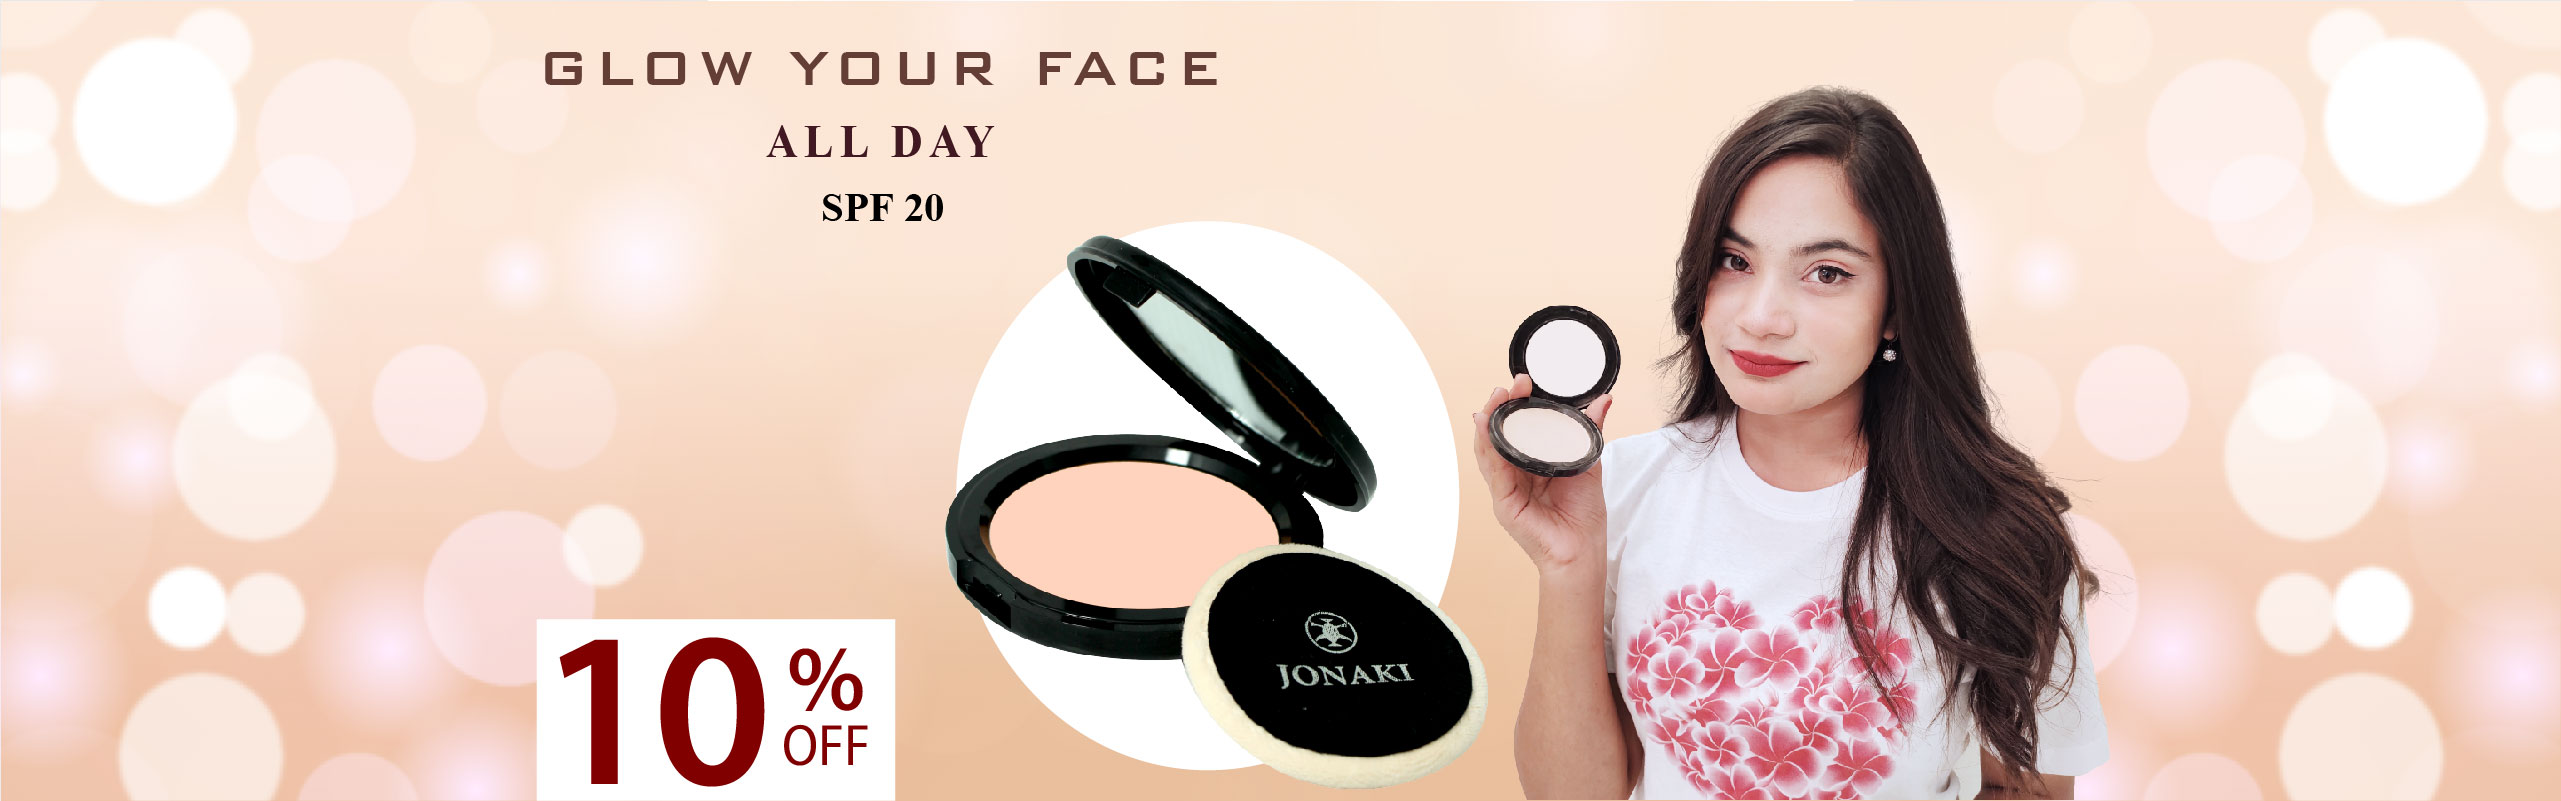 jonaki-compact-powder-mothers-day-offer